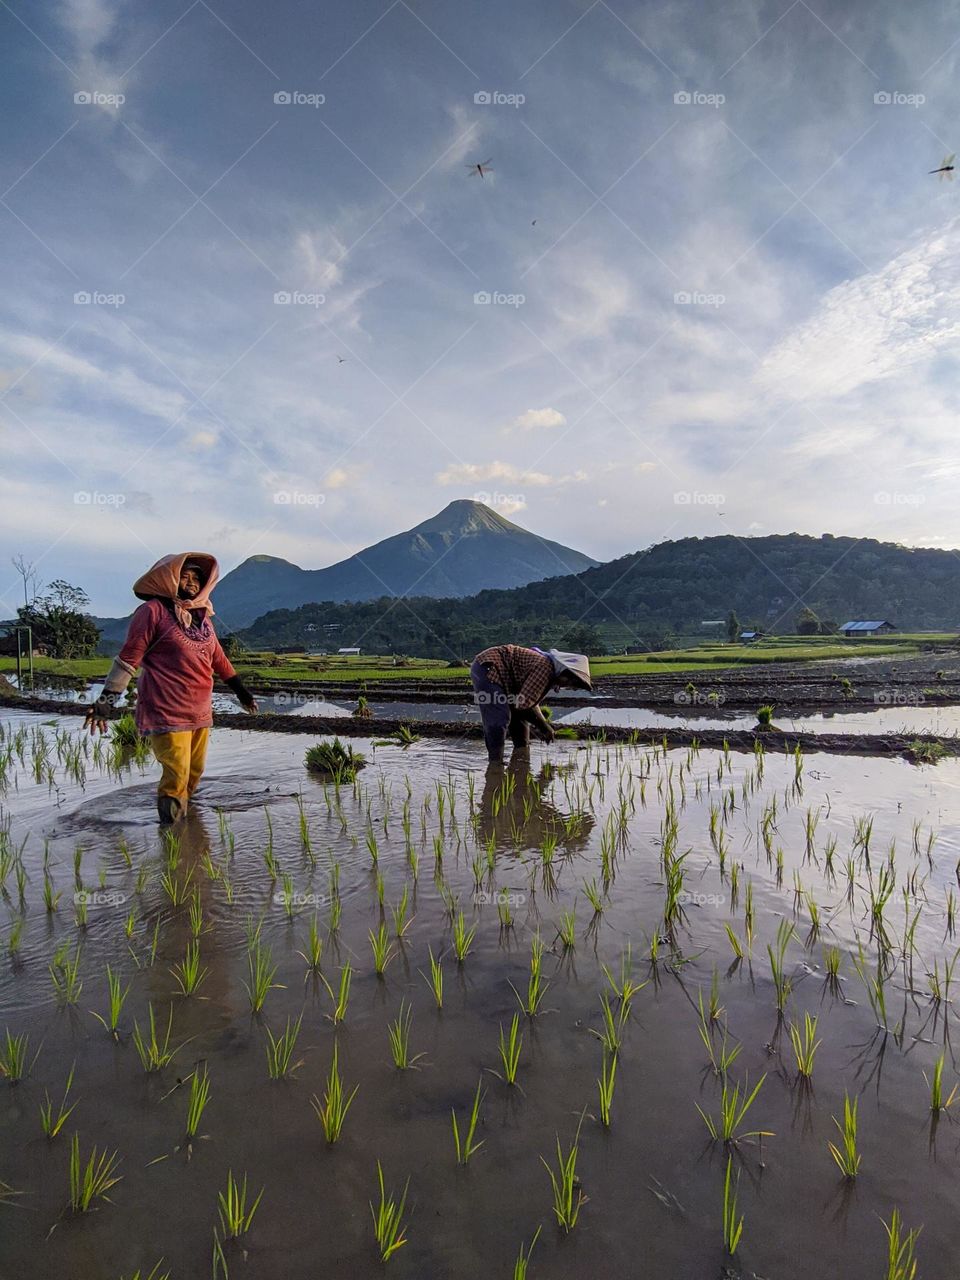 Rice fields are productive land that is useful for agriculture and rice cultivation. The farmers use part of the paddy fields to grow rice, because the staple food of the Indonesian people is rice. Rice is produced from rice grown by people whose ey